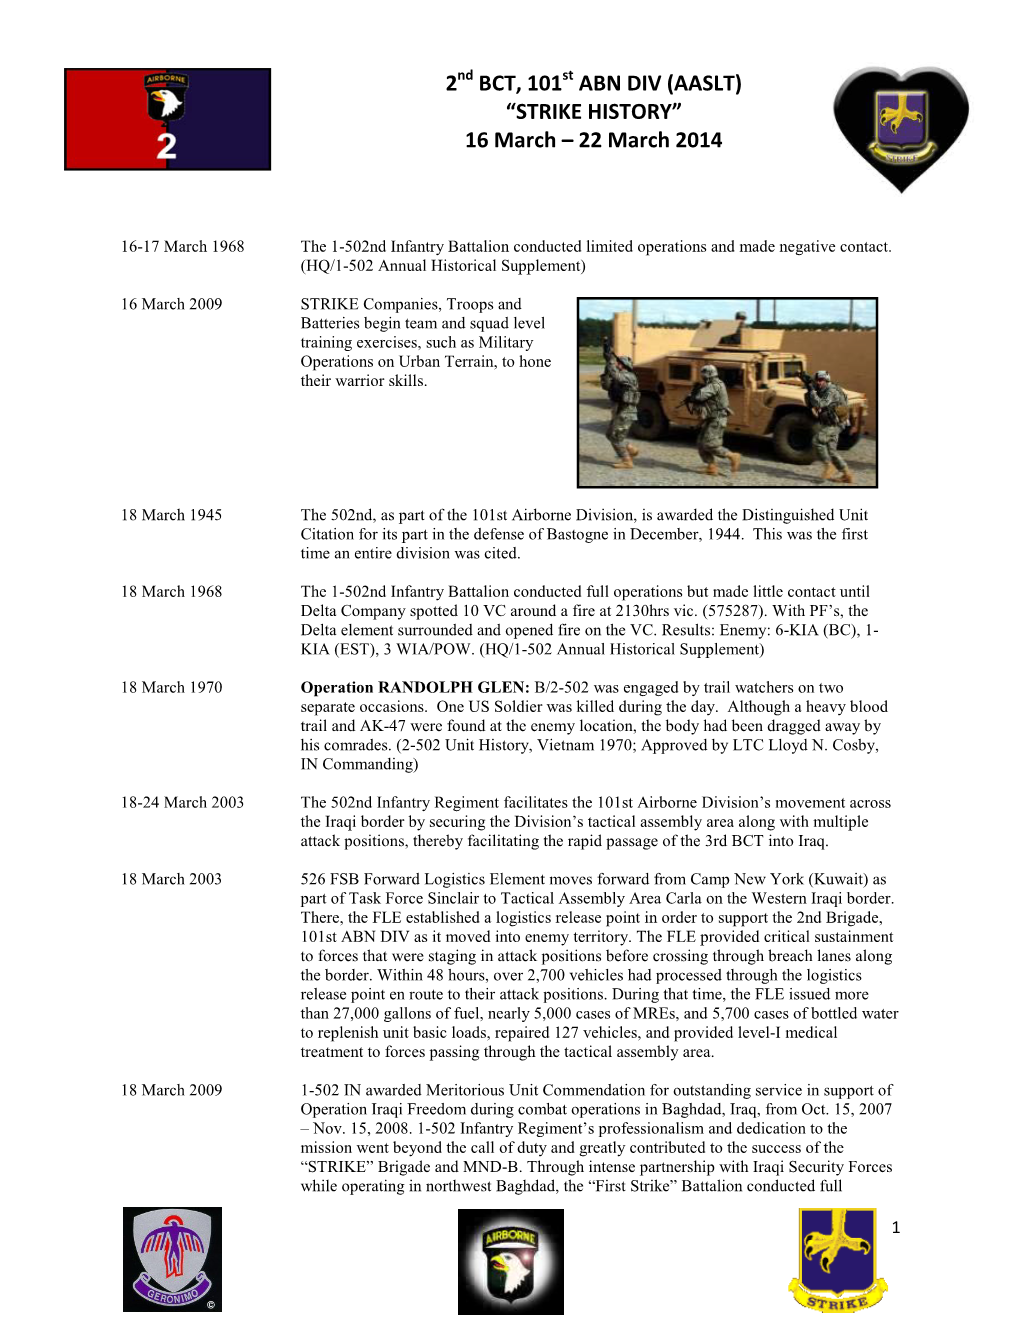 2Nd BCT, 101St ABN DIV (AASLT) “STRIKE HISTORY” 16 March – 22 March 2014